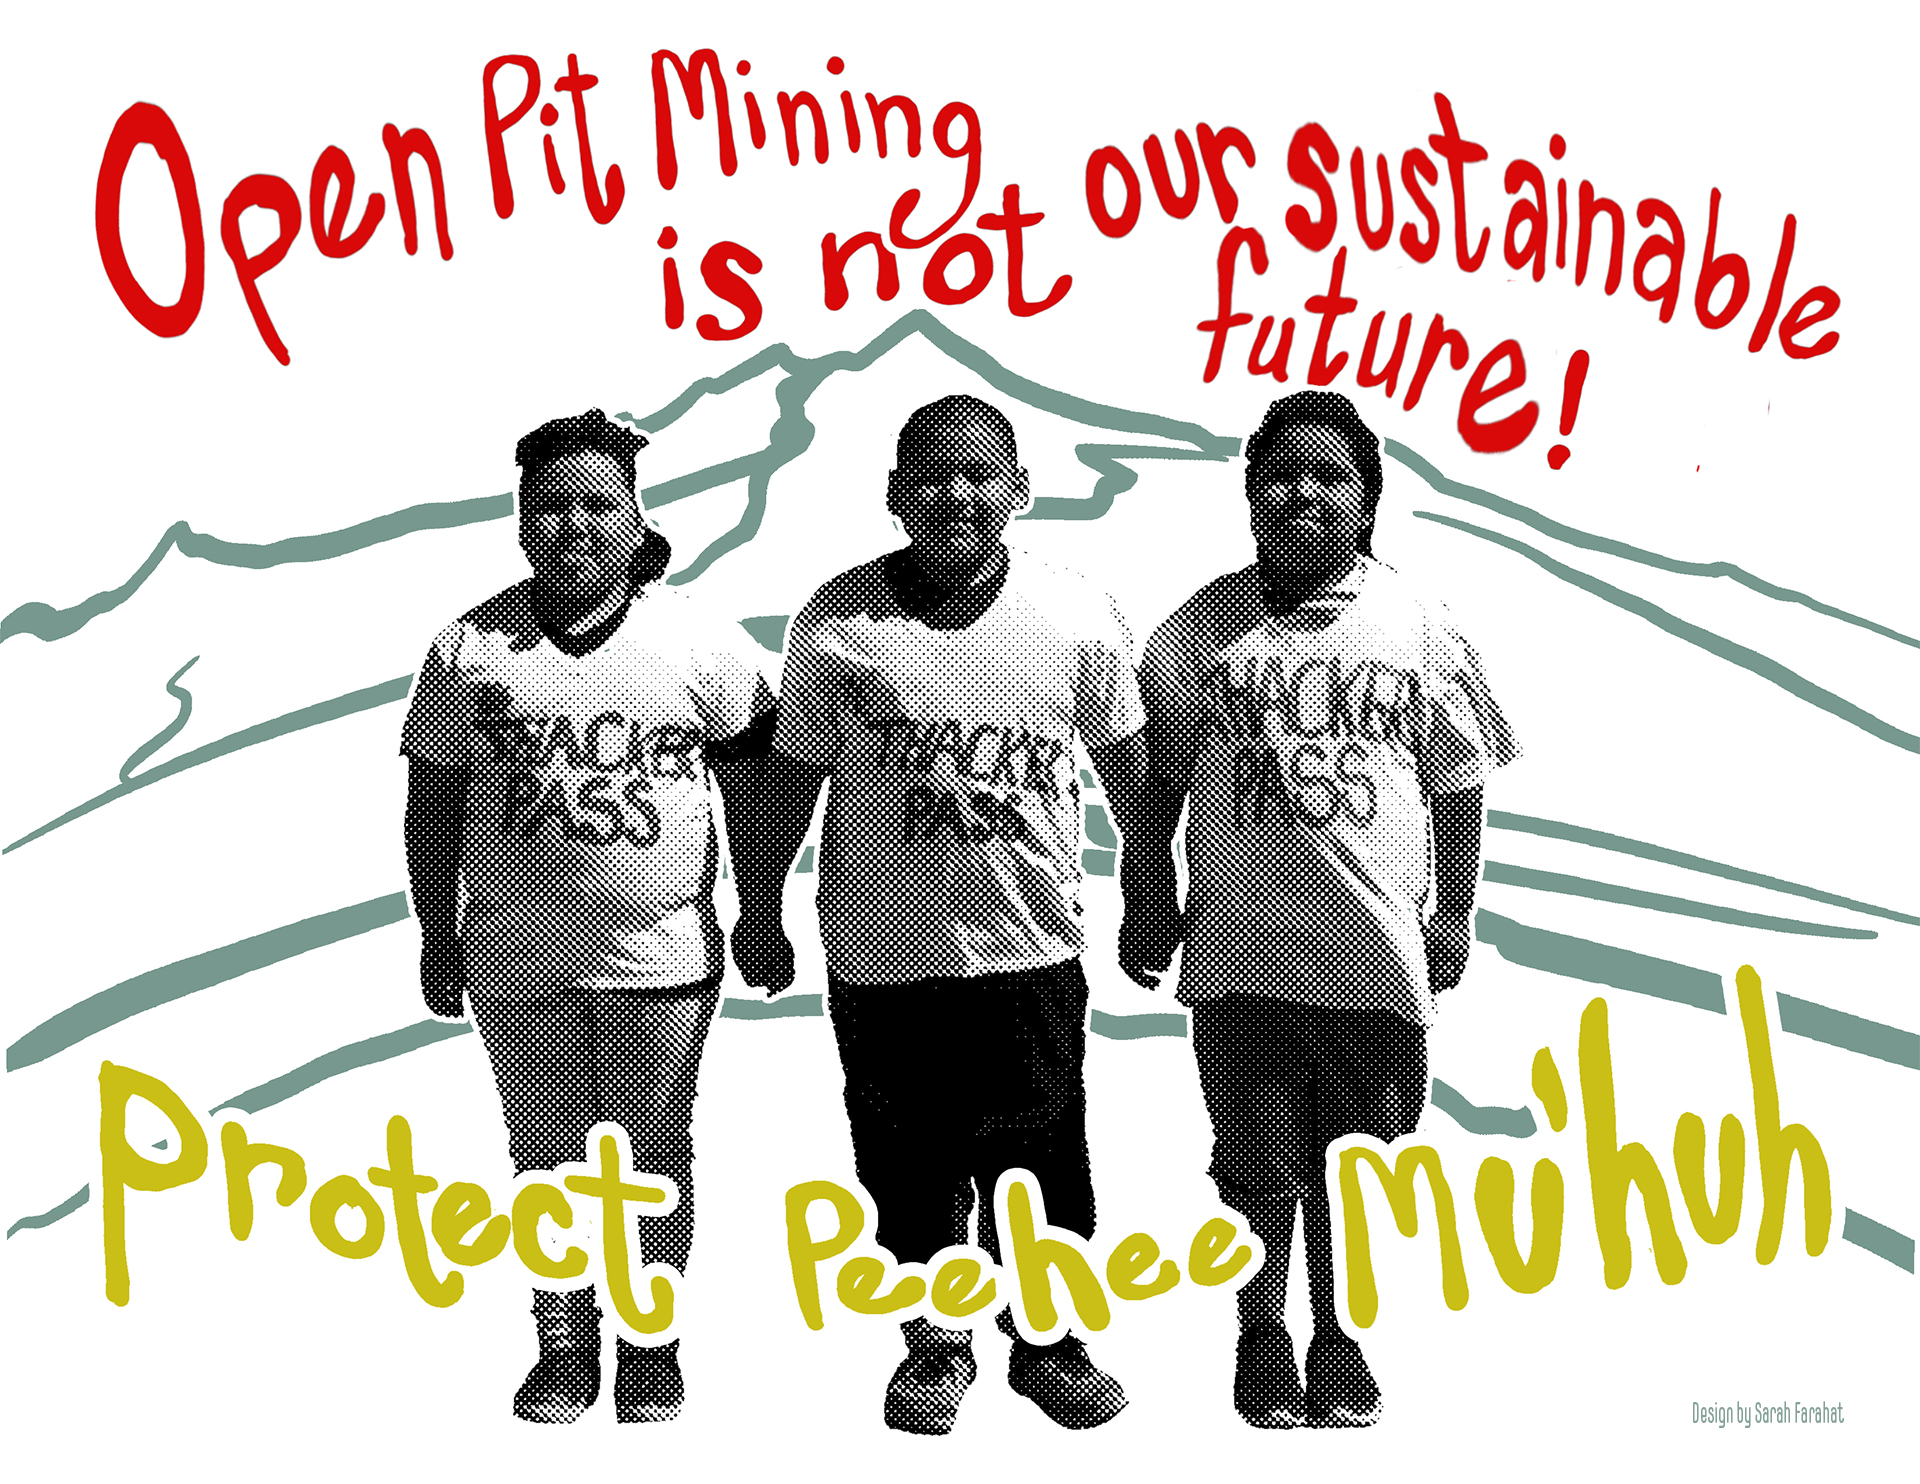 Protect Peehee Mu’huh
Digital print, 8.5" x 11”, 2022
Designed for Indigenous People’s Power Project
